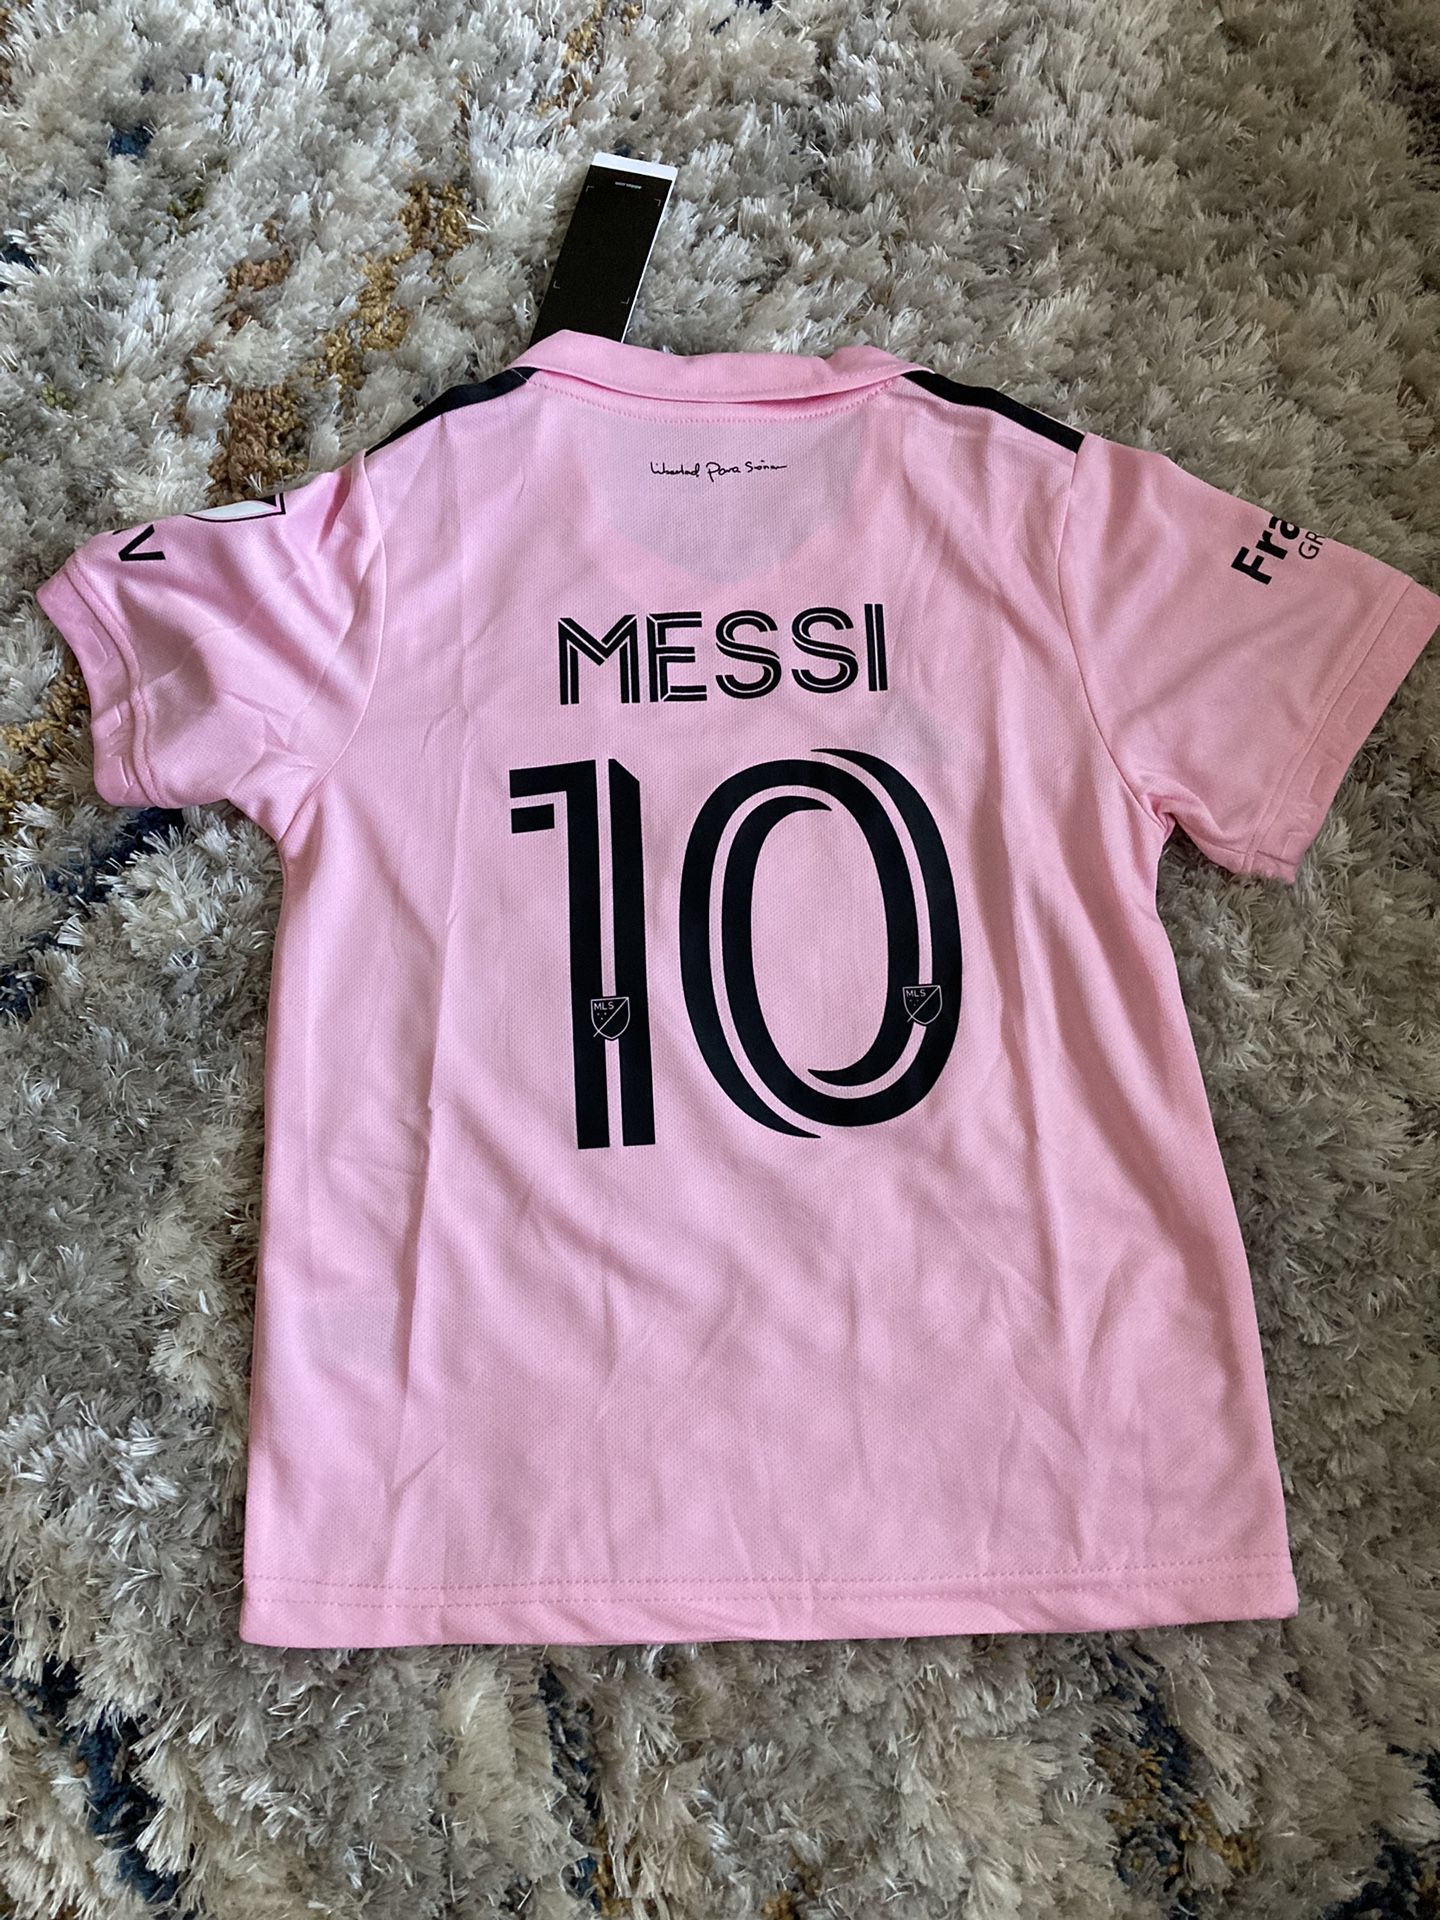 messi soccer jersey youth